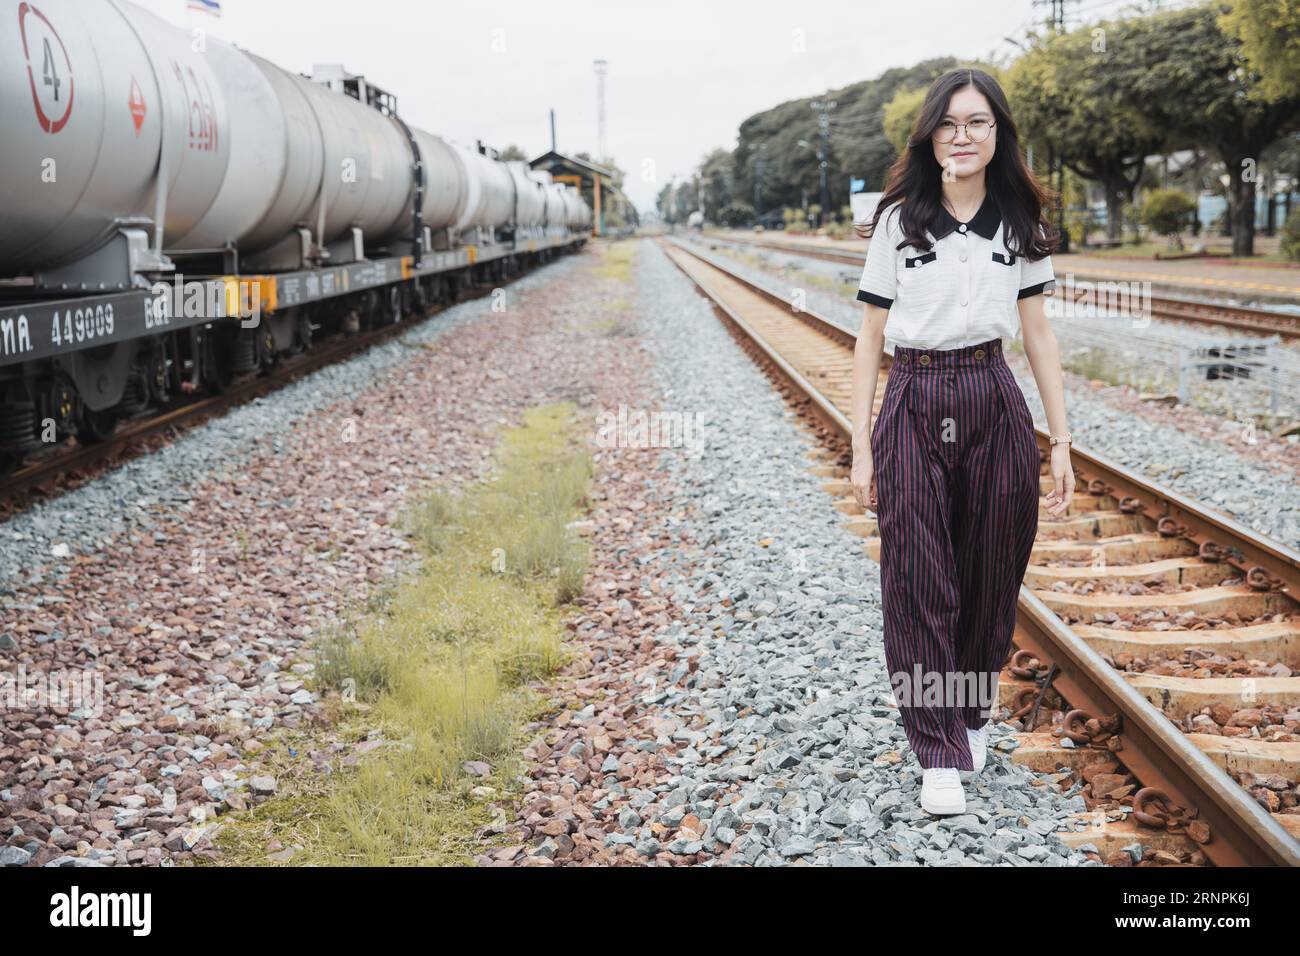 portrait happy asian woman lady on railway train station locomotive industry leisure relax smile image Stock Photo